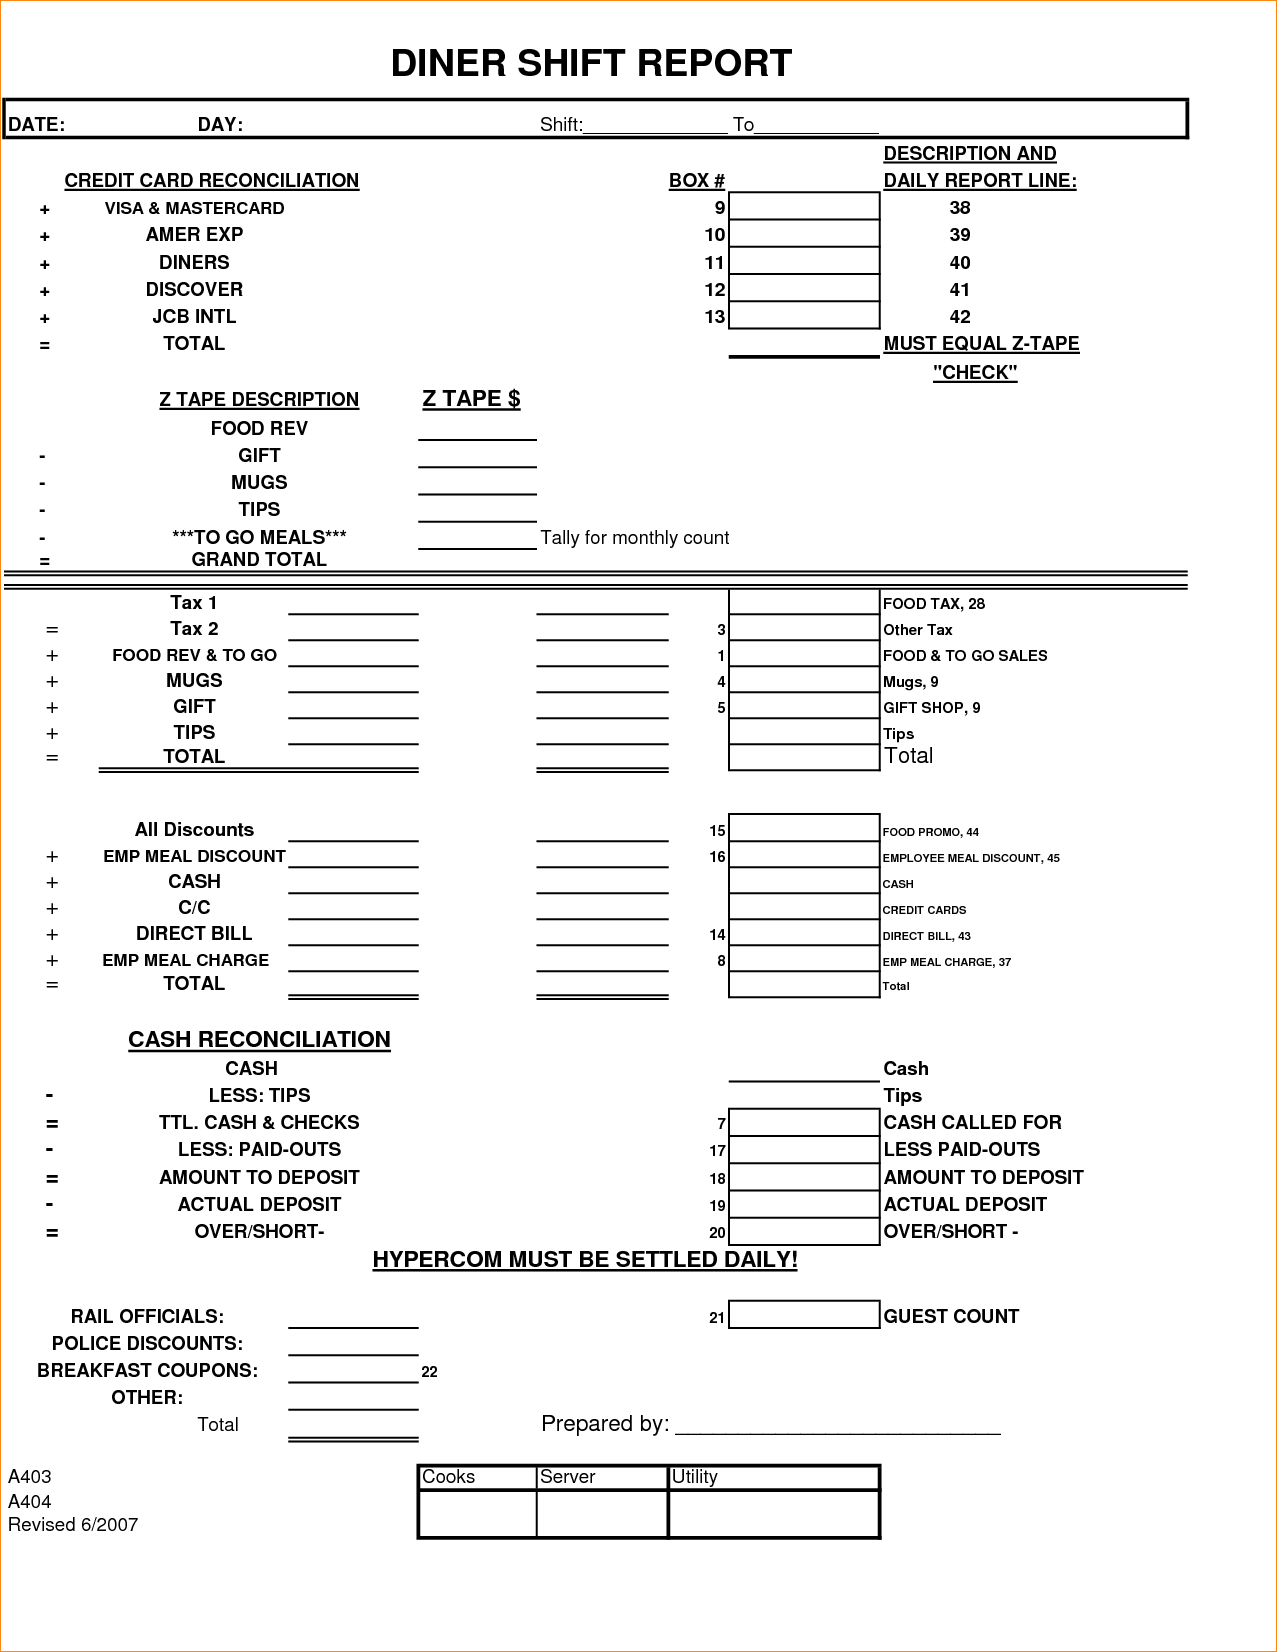 29 Images Of End Of Shift Report Template Nursing With Regard To Nurse Shift Report Sheet Template